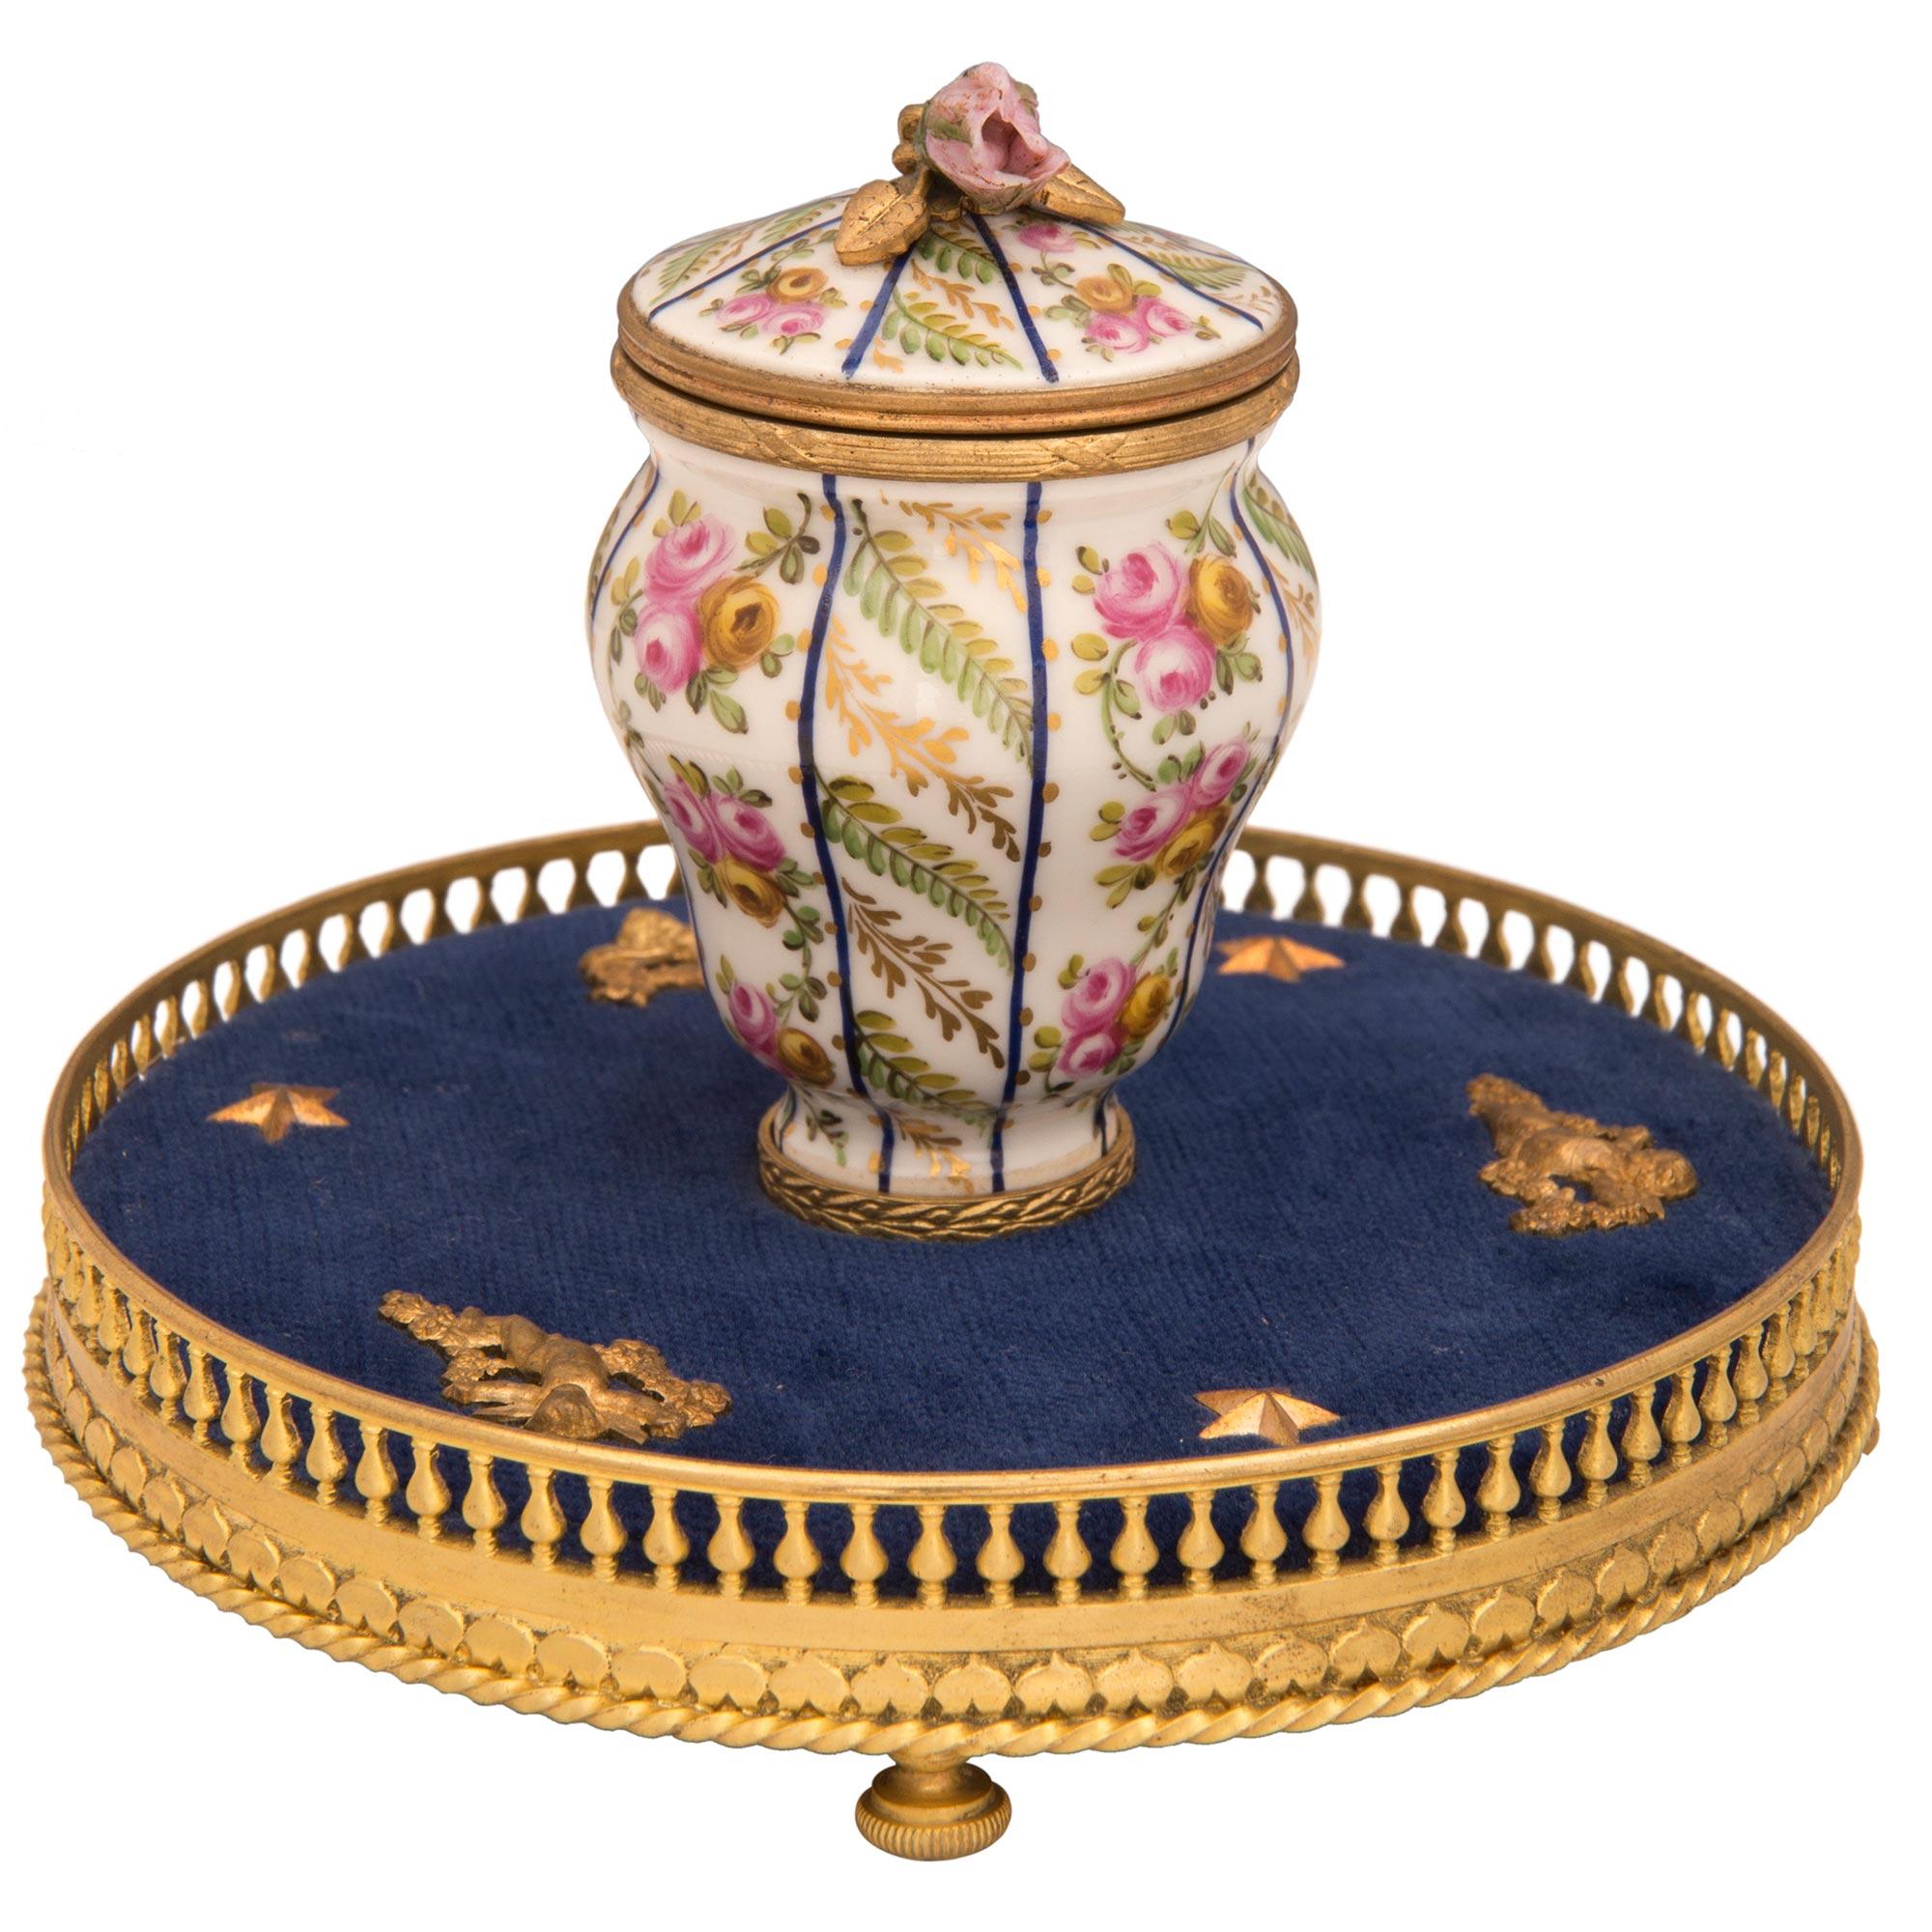 A charming and most elegant French 19th century Louis XVI st. Sèvres Porcelain and ormolu inkwell, stamped, P.C.G. The inkwell is raised by Fine fluted bun shaped feet below the beautiful wrap around ormolu gallery. The gallery displays a